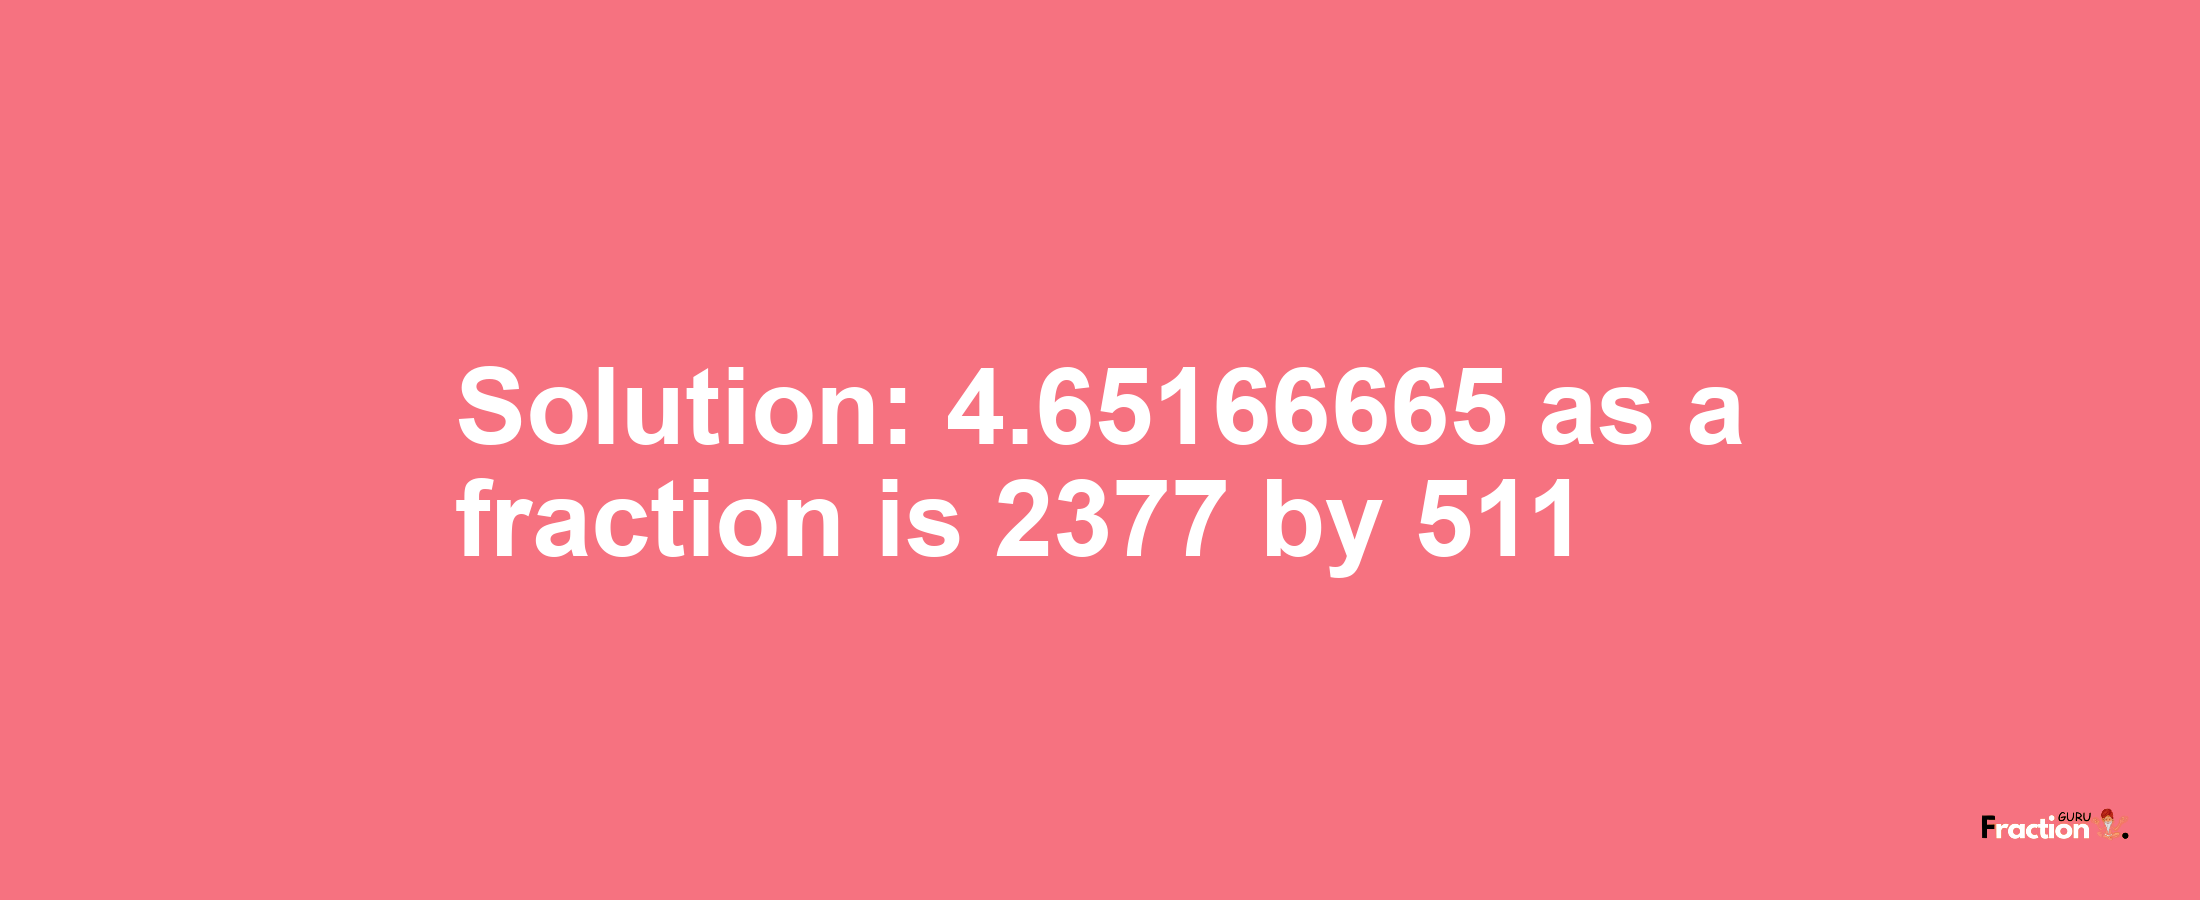 Solution:4.65166665 as a fraction is 2377/511